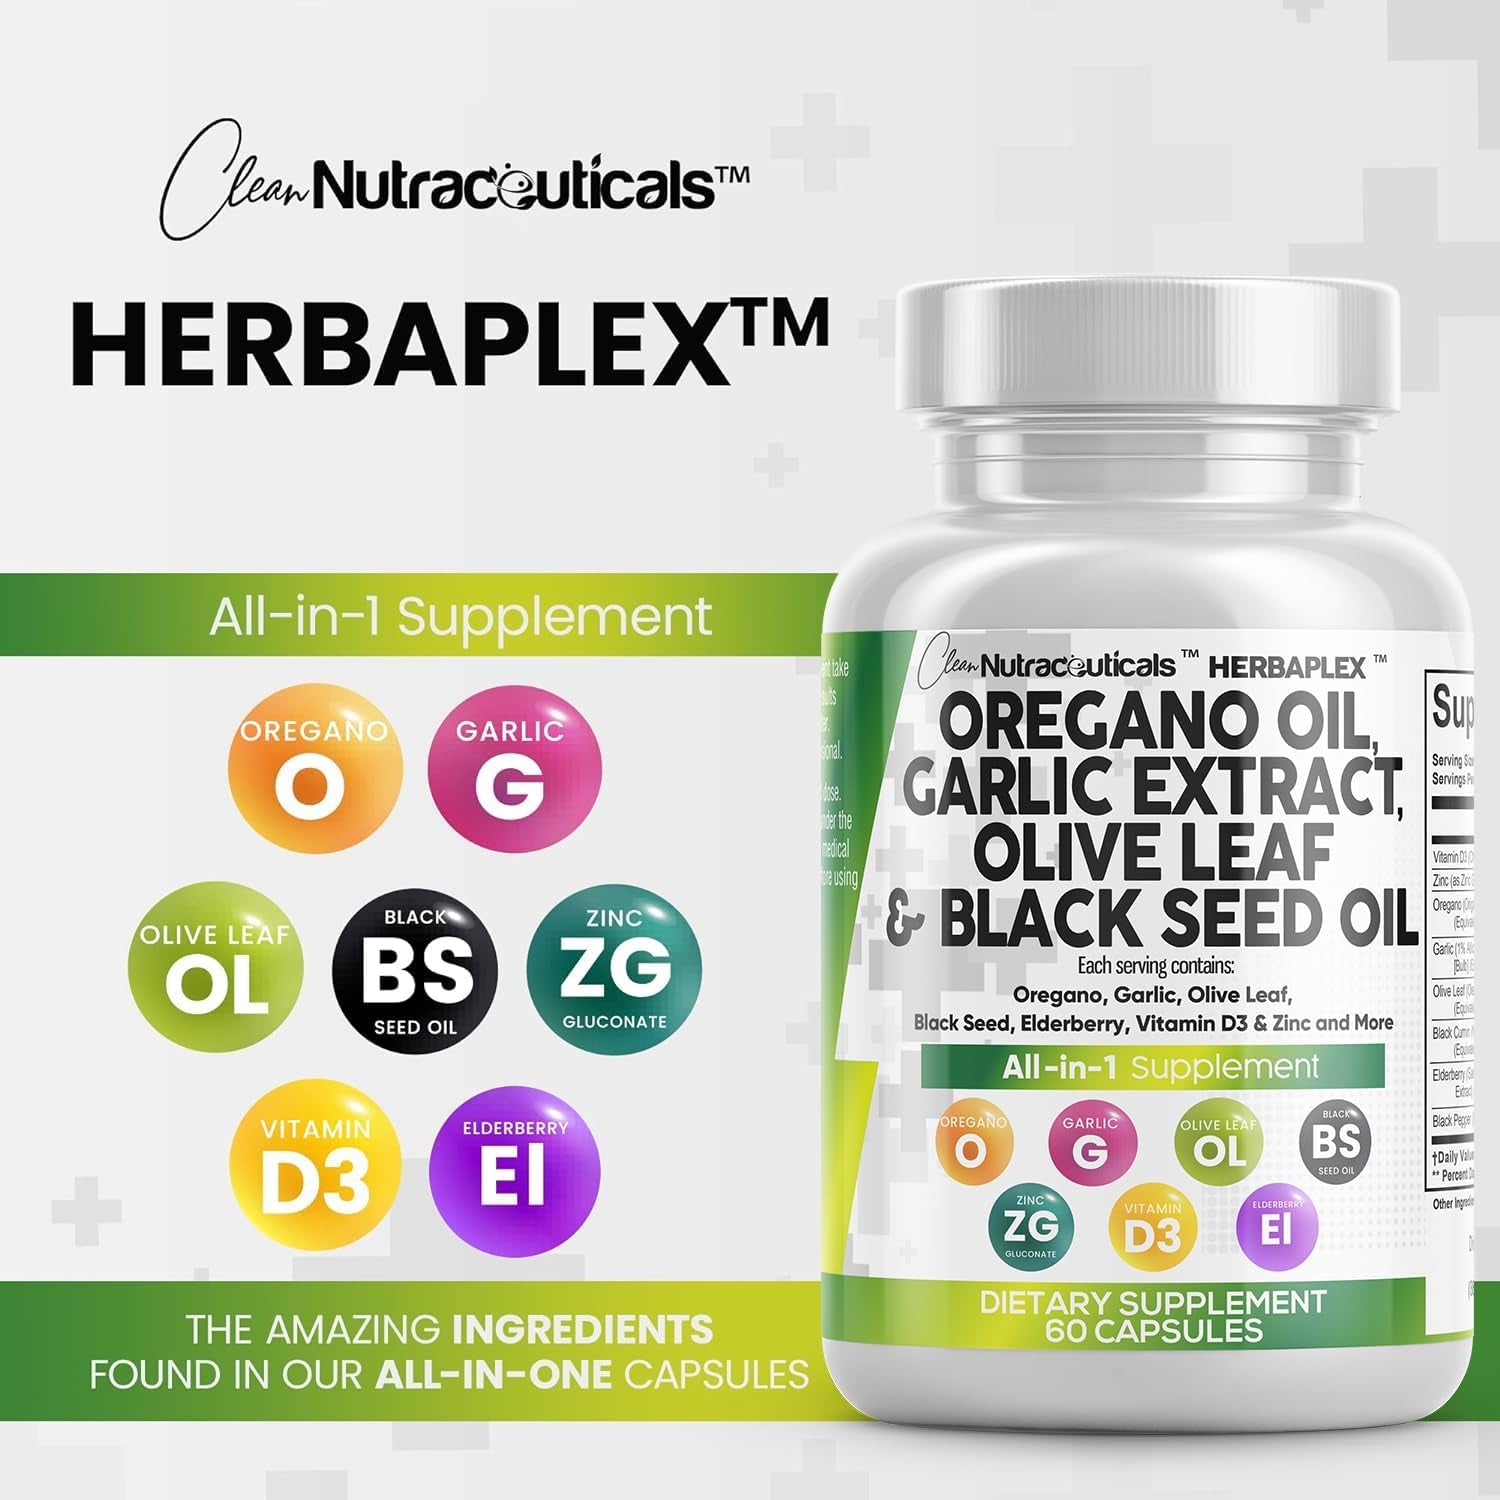 Oregano Oil 6000Mg Garlic Extract 4000Mg Olive Leaf 3000Mg Black Seed Oil 3000Mg - Immune Support & Digestive Health Supplement for Women and Men with Vitamin D3 and Zinc - 60 Caps